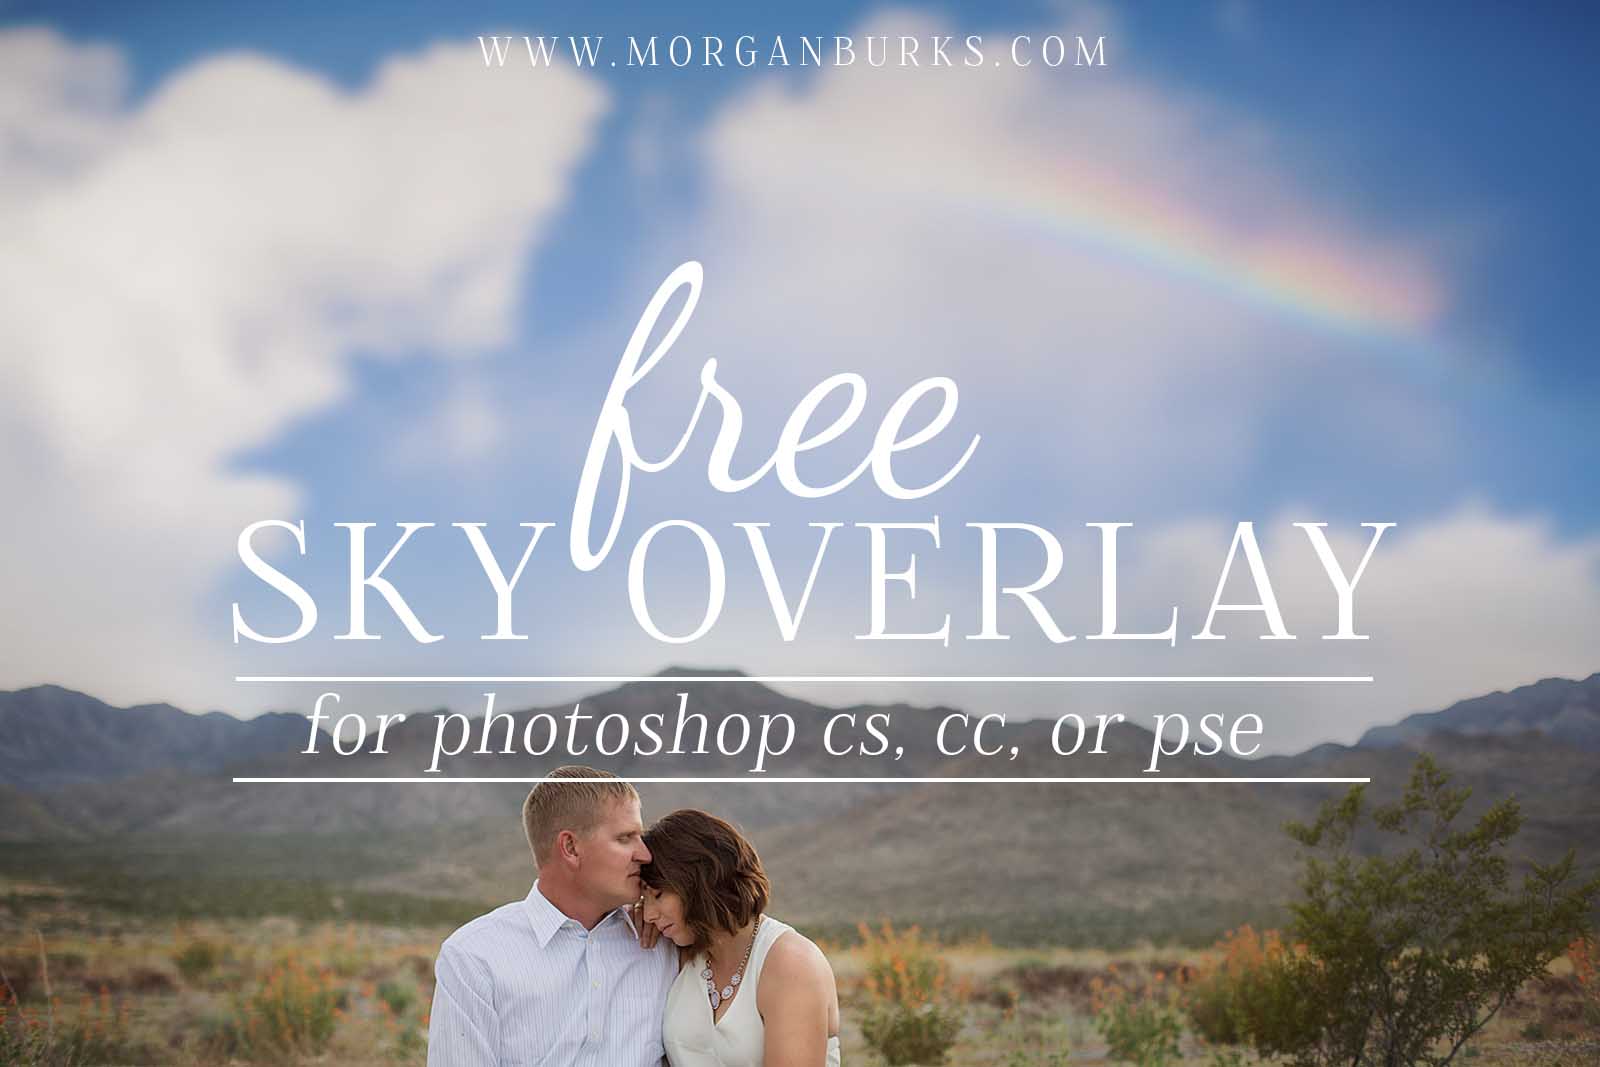 Download free sky overlays for photoshop